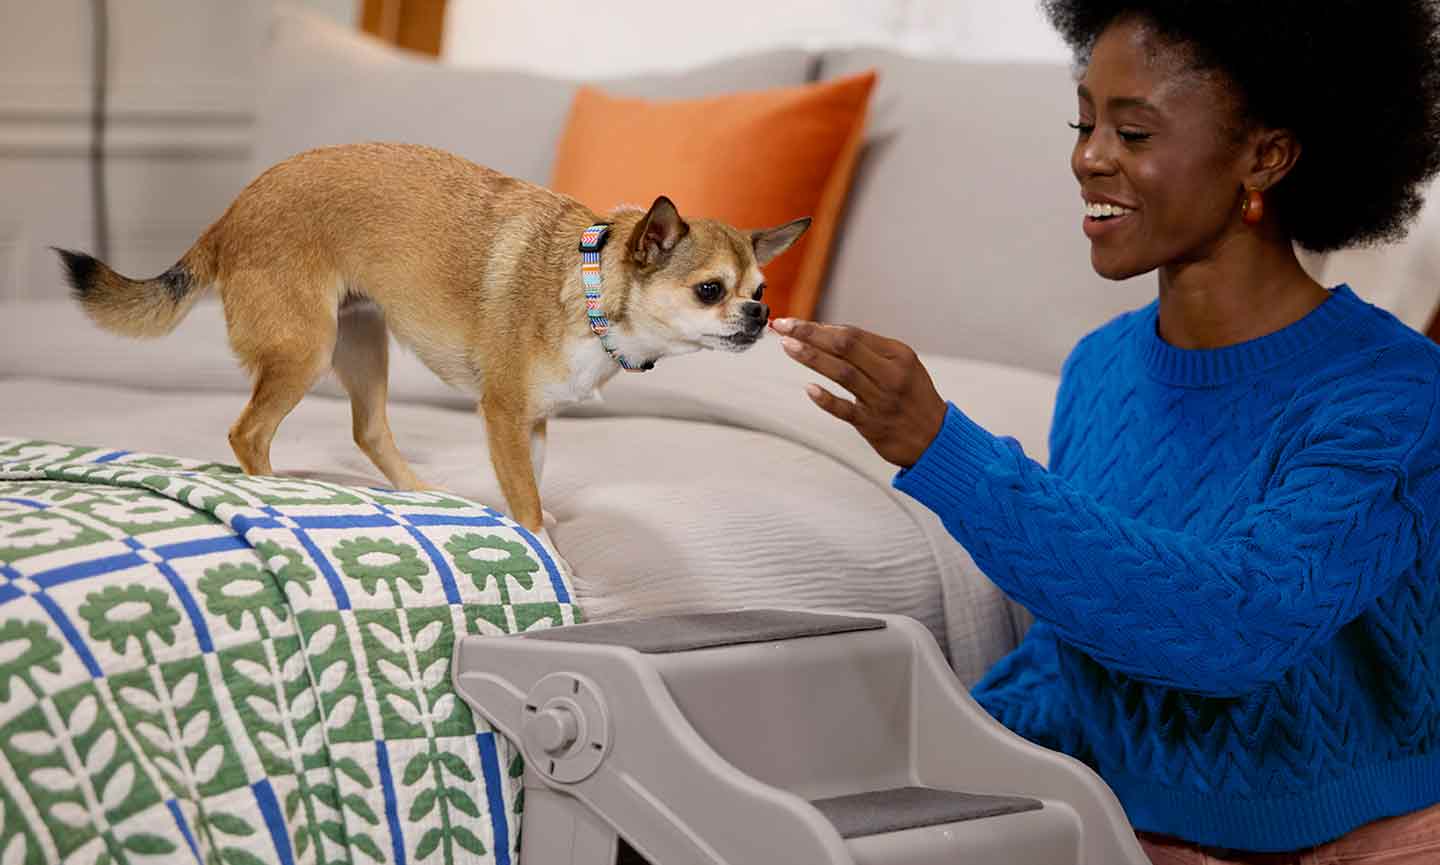 A woman giving treats to her dog, who is standing on top of the bed